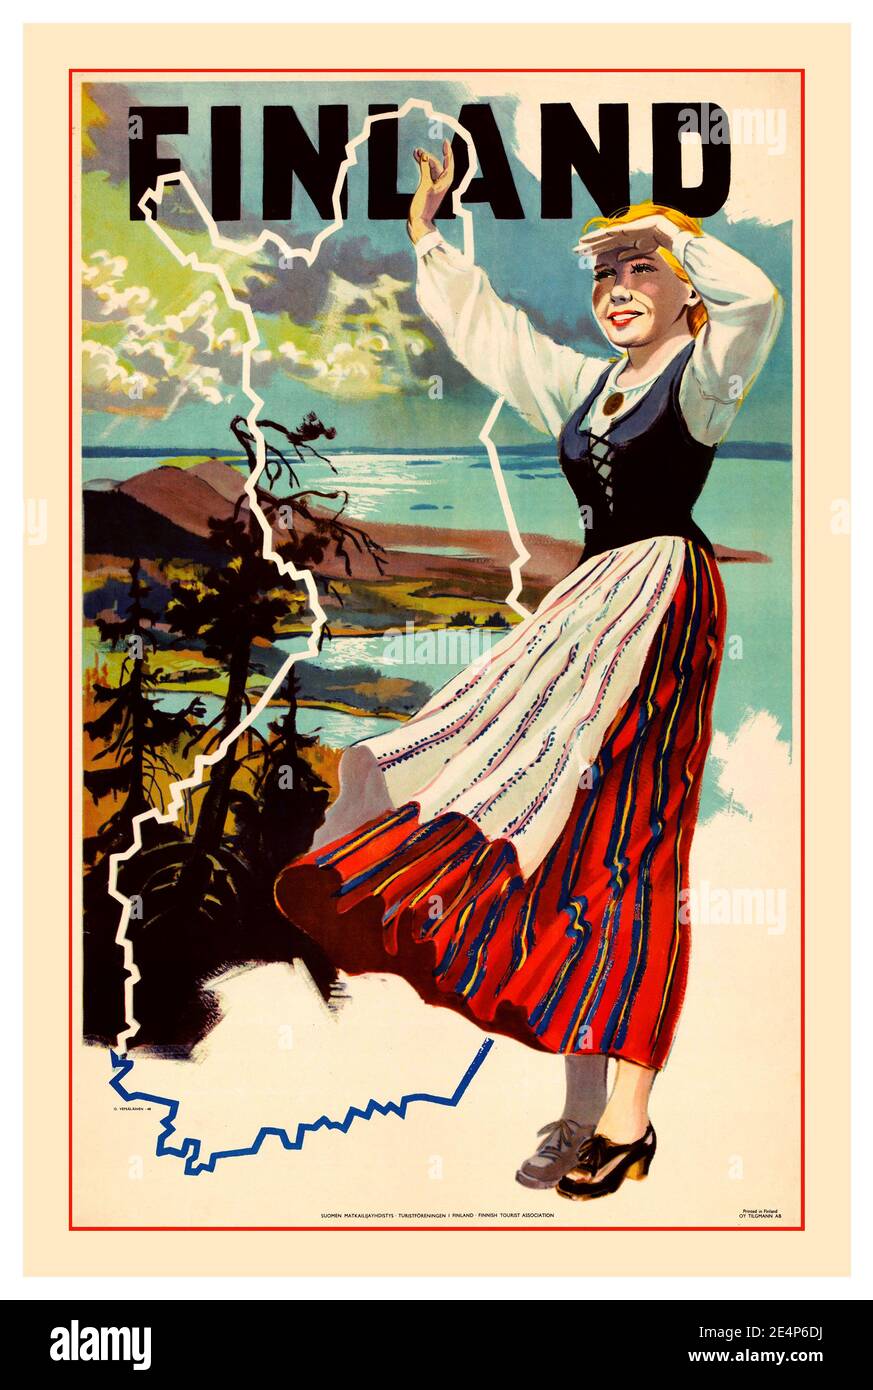 FINLAND Vintage 1940’s retro travel poster with Finnish blond girl in traditional national folk country dress with map & archipelago islands illustration behind Stock Photo